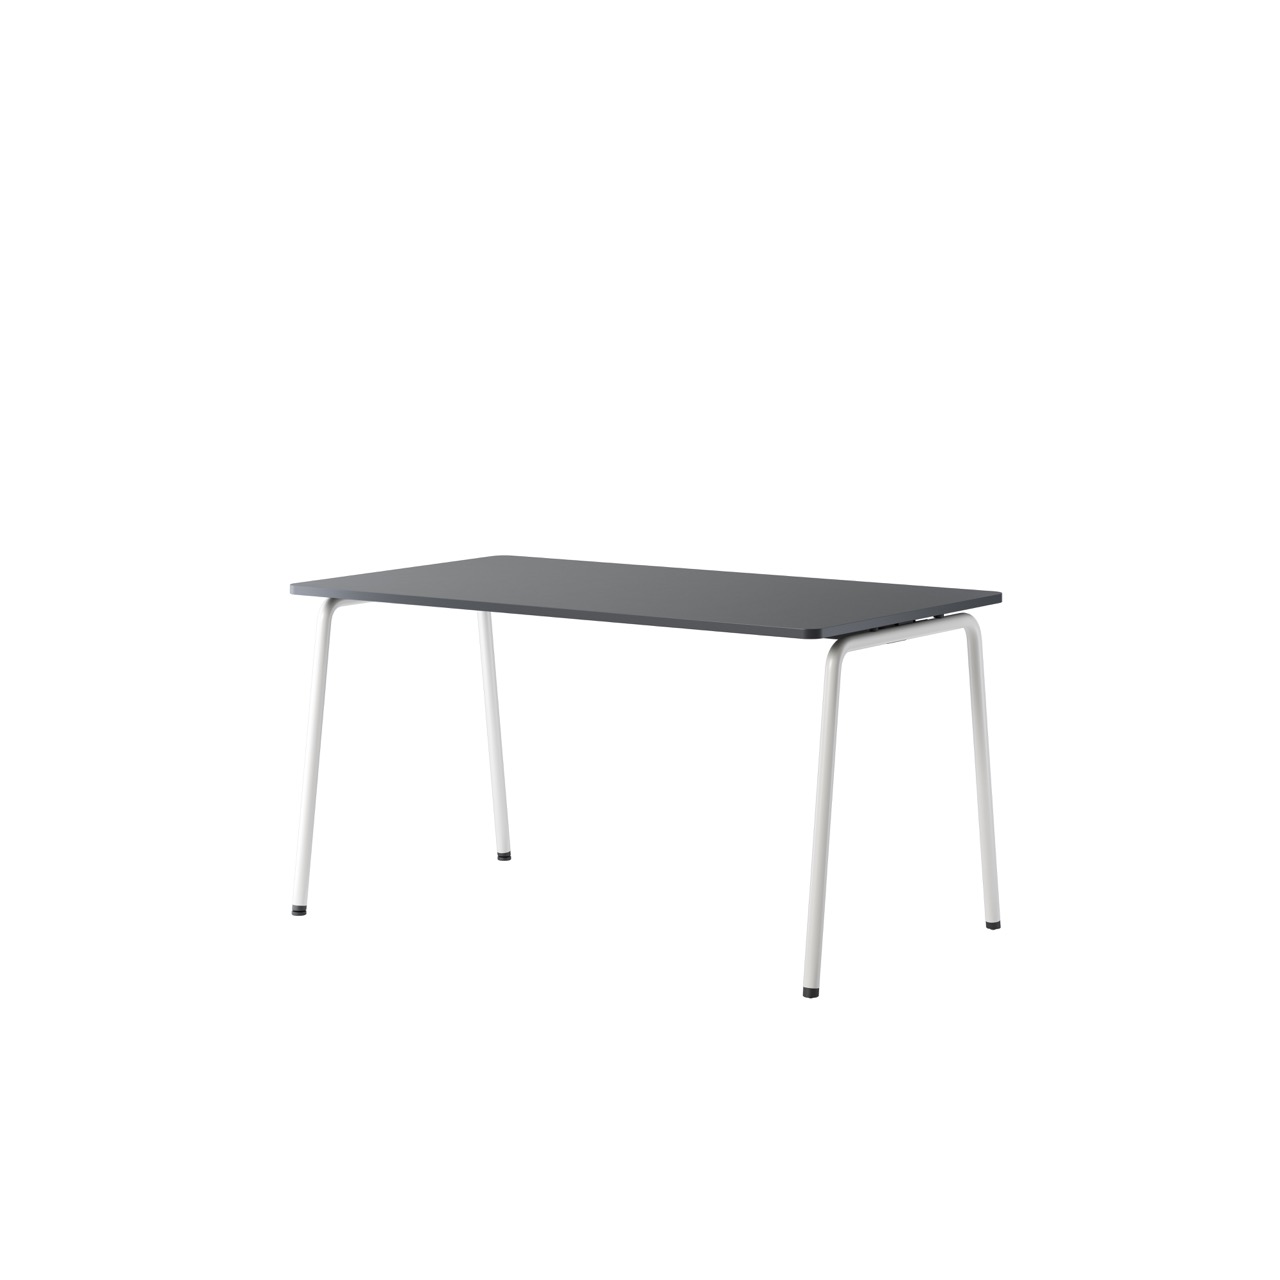 OCEE&FOUR - Tables - FourReal 74 - 140 x 80 - Angled - Packshot Image 10 Large